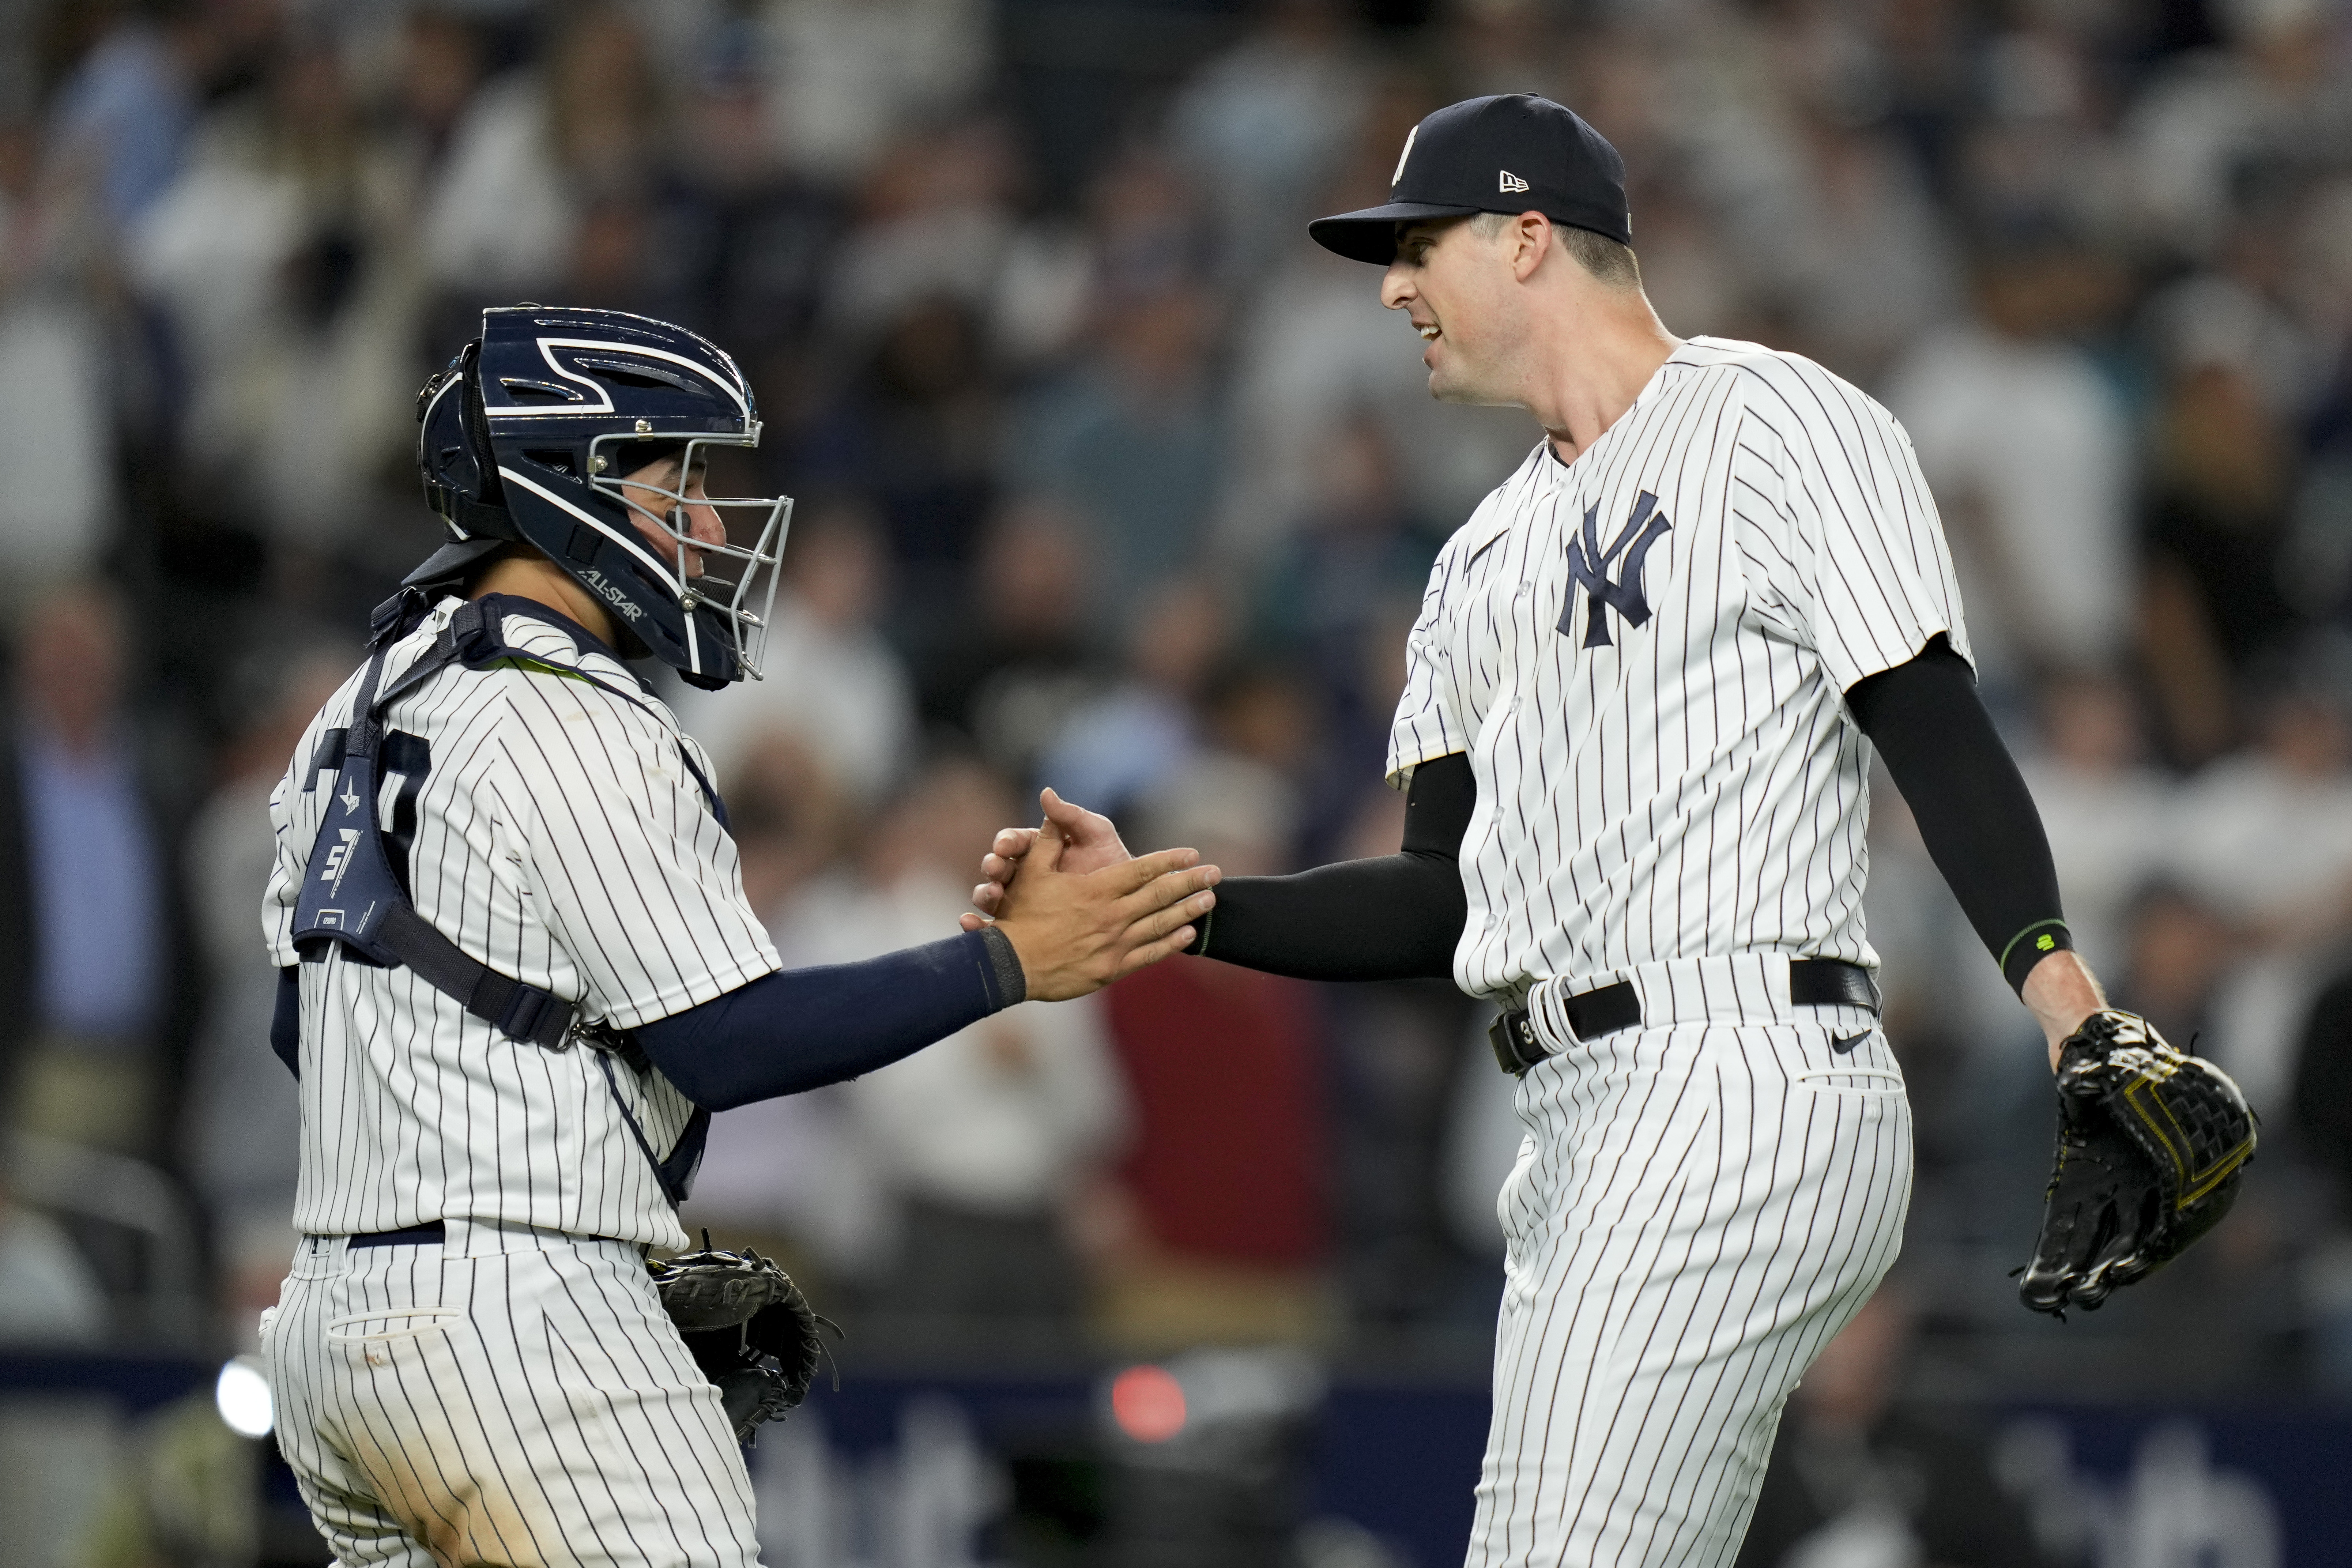 Wagging his finger at the Mariners, Cole stops the Yankees' 4-game skid  with a 3-1 win